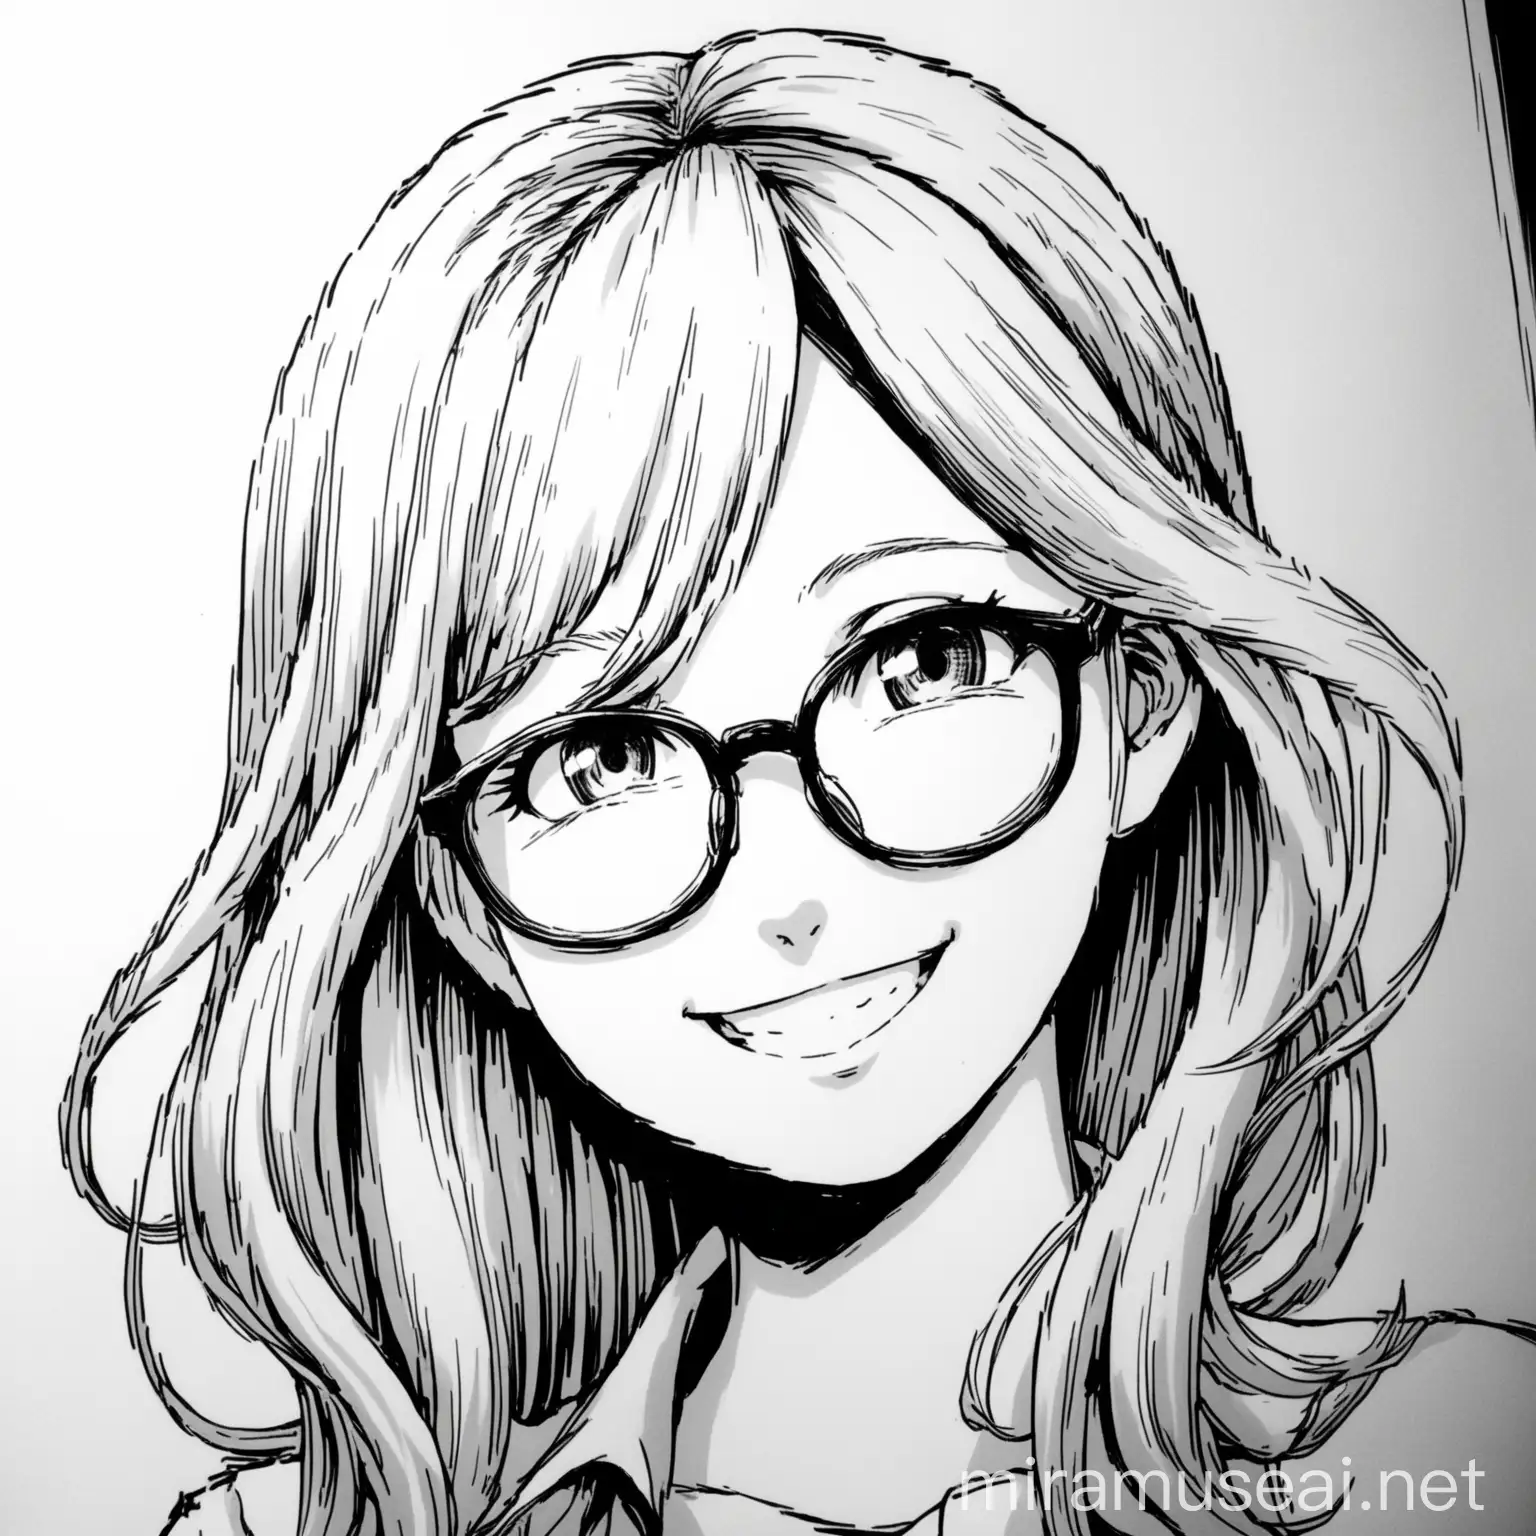 Smiling Manga Style Blonde Girl with Glasses in Black and White